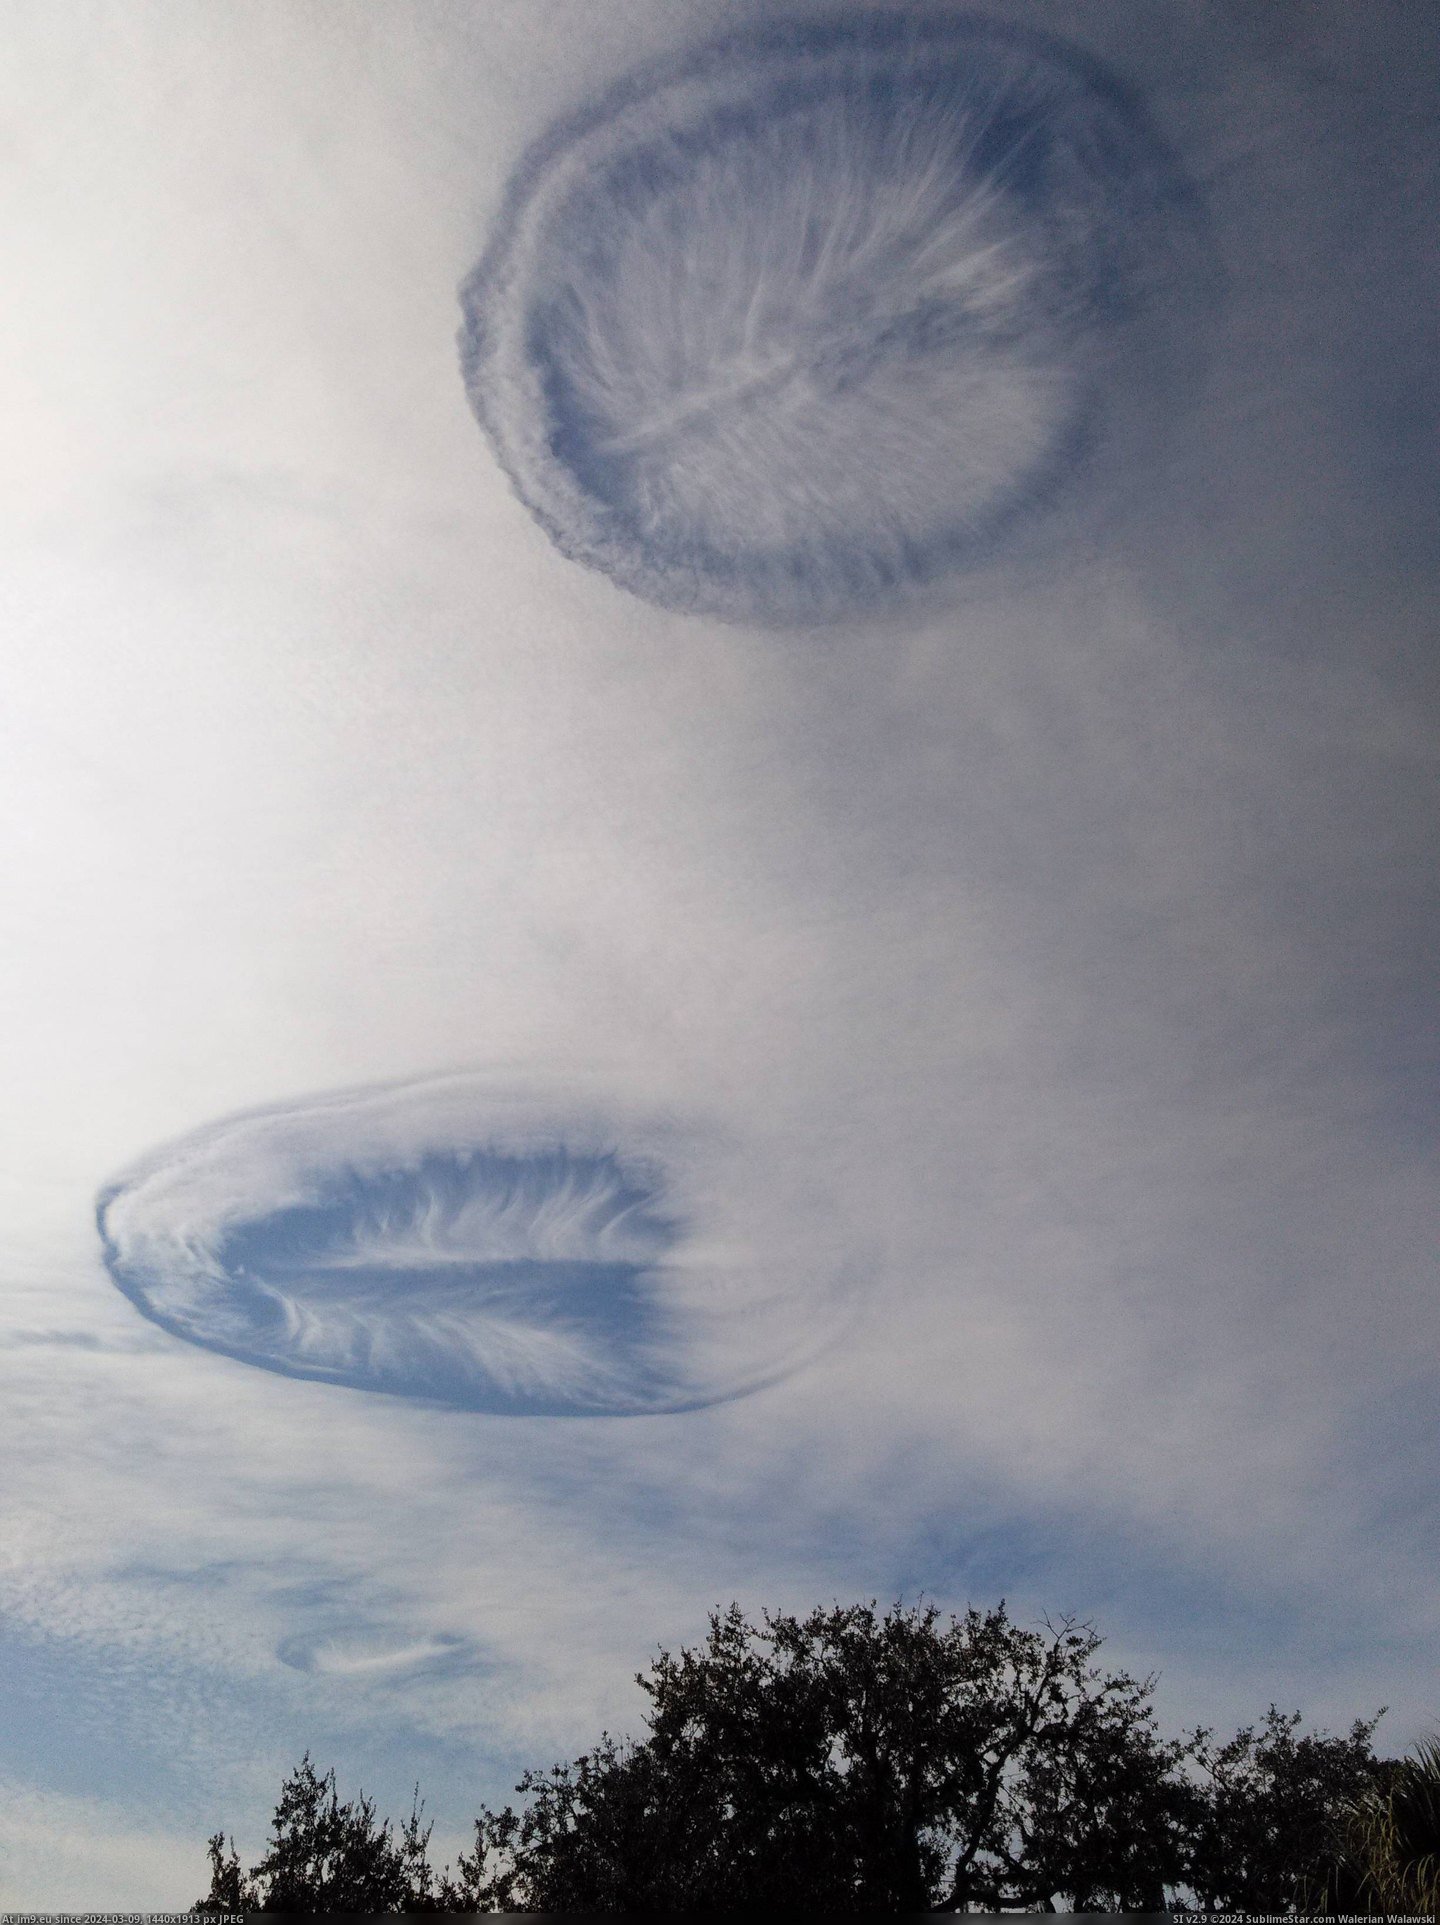 #Wtf #Hole #Florida #Central #Punch #Crazy #Clouds [Wtf] Crazy looking hole punch clouds over central Florida. Pic. (Image of album My r/WTF favs))